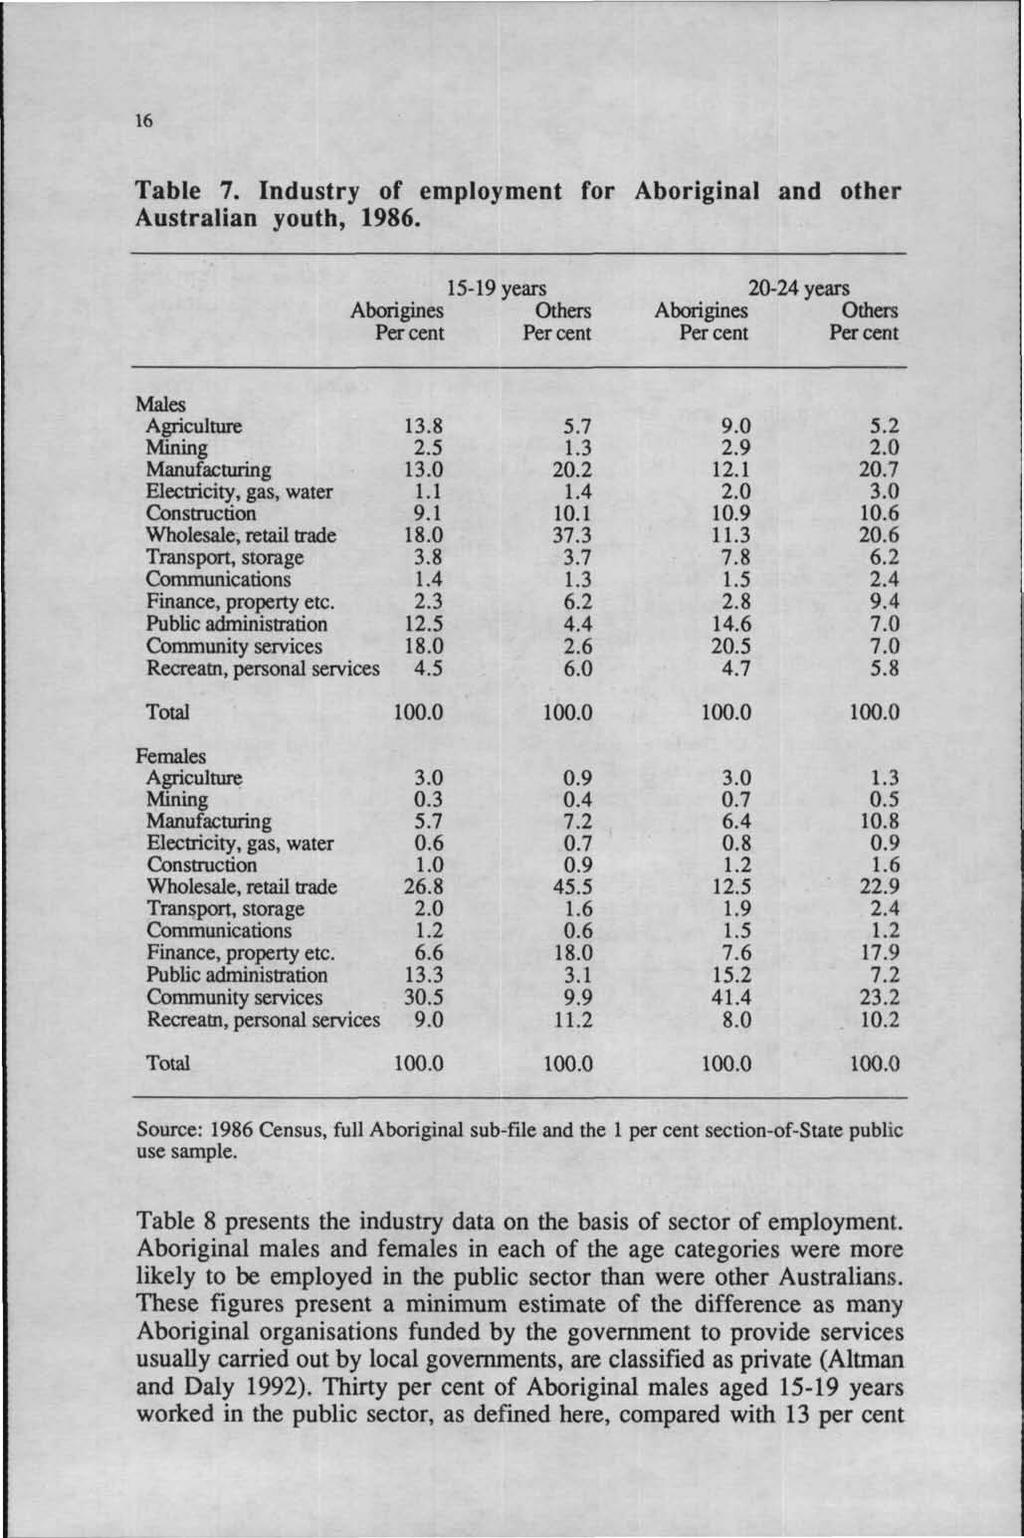 16 Table 7. Industry of employment for Aboriginal and other Australian youth, 1986.